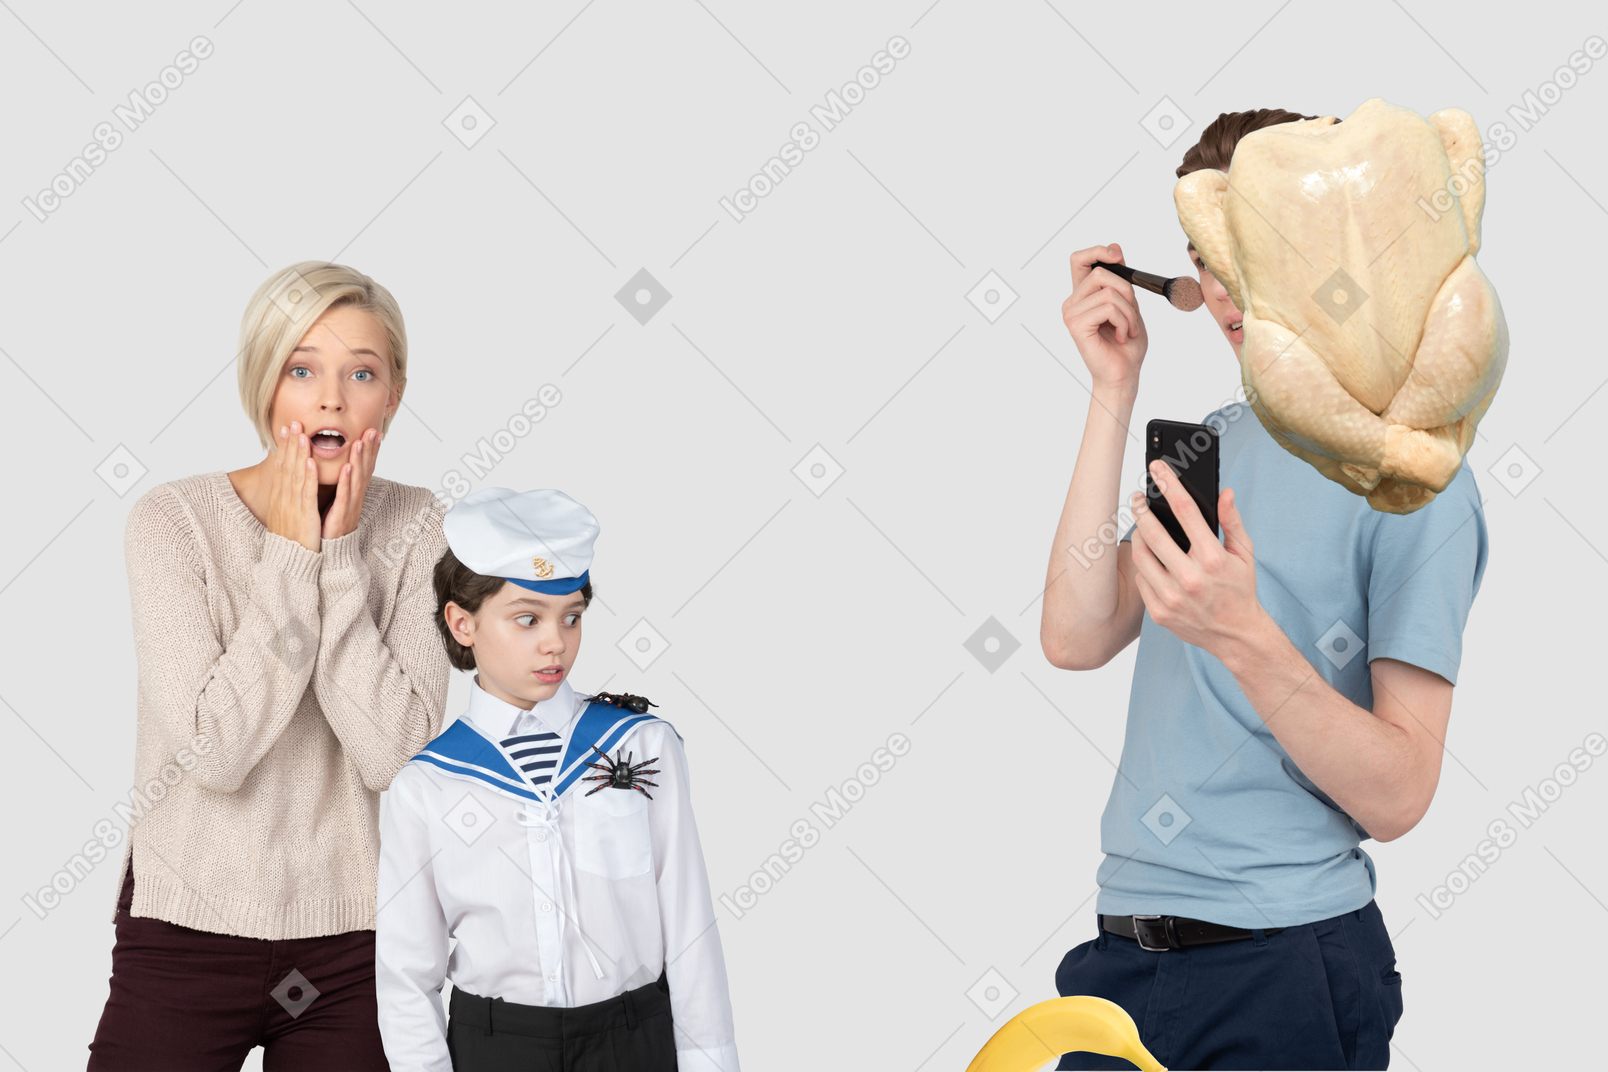 Shocked woman and boy looking at man with chicken head applying his makeup 